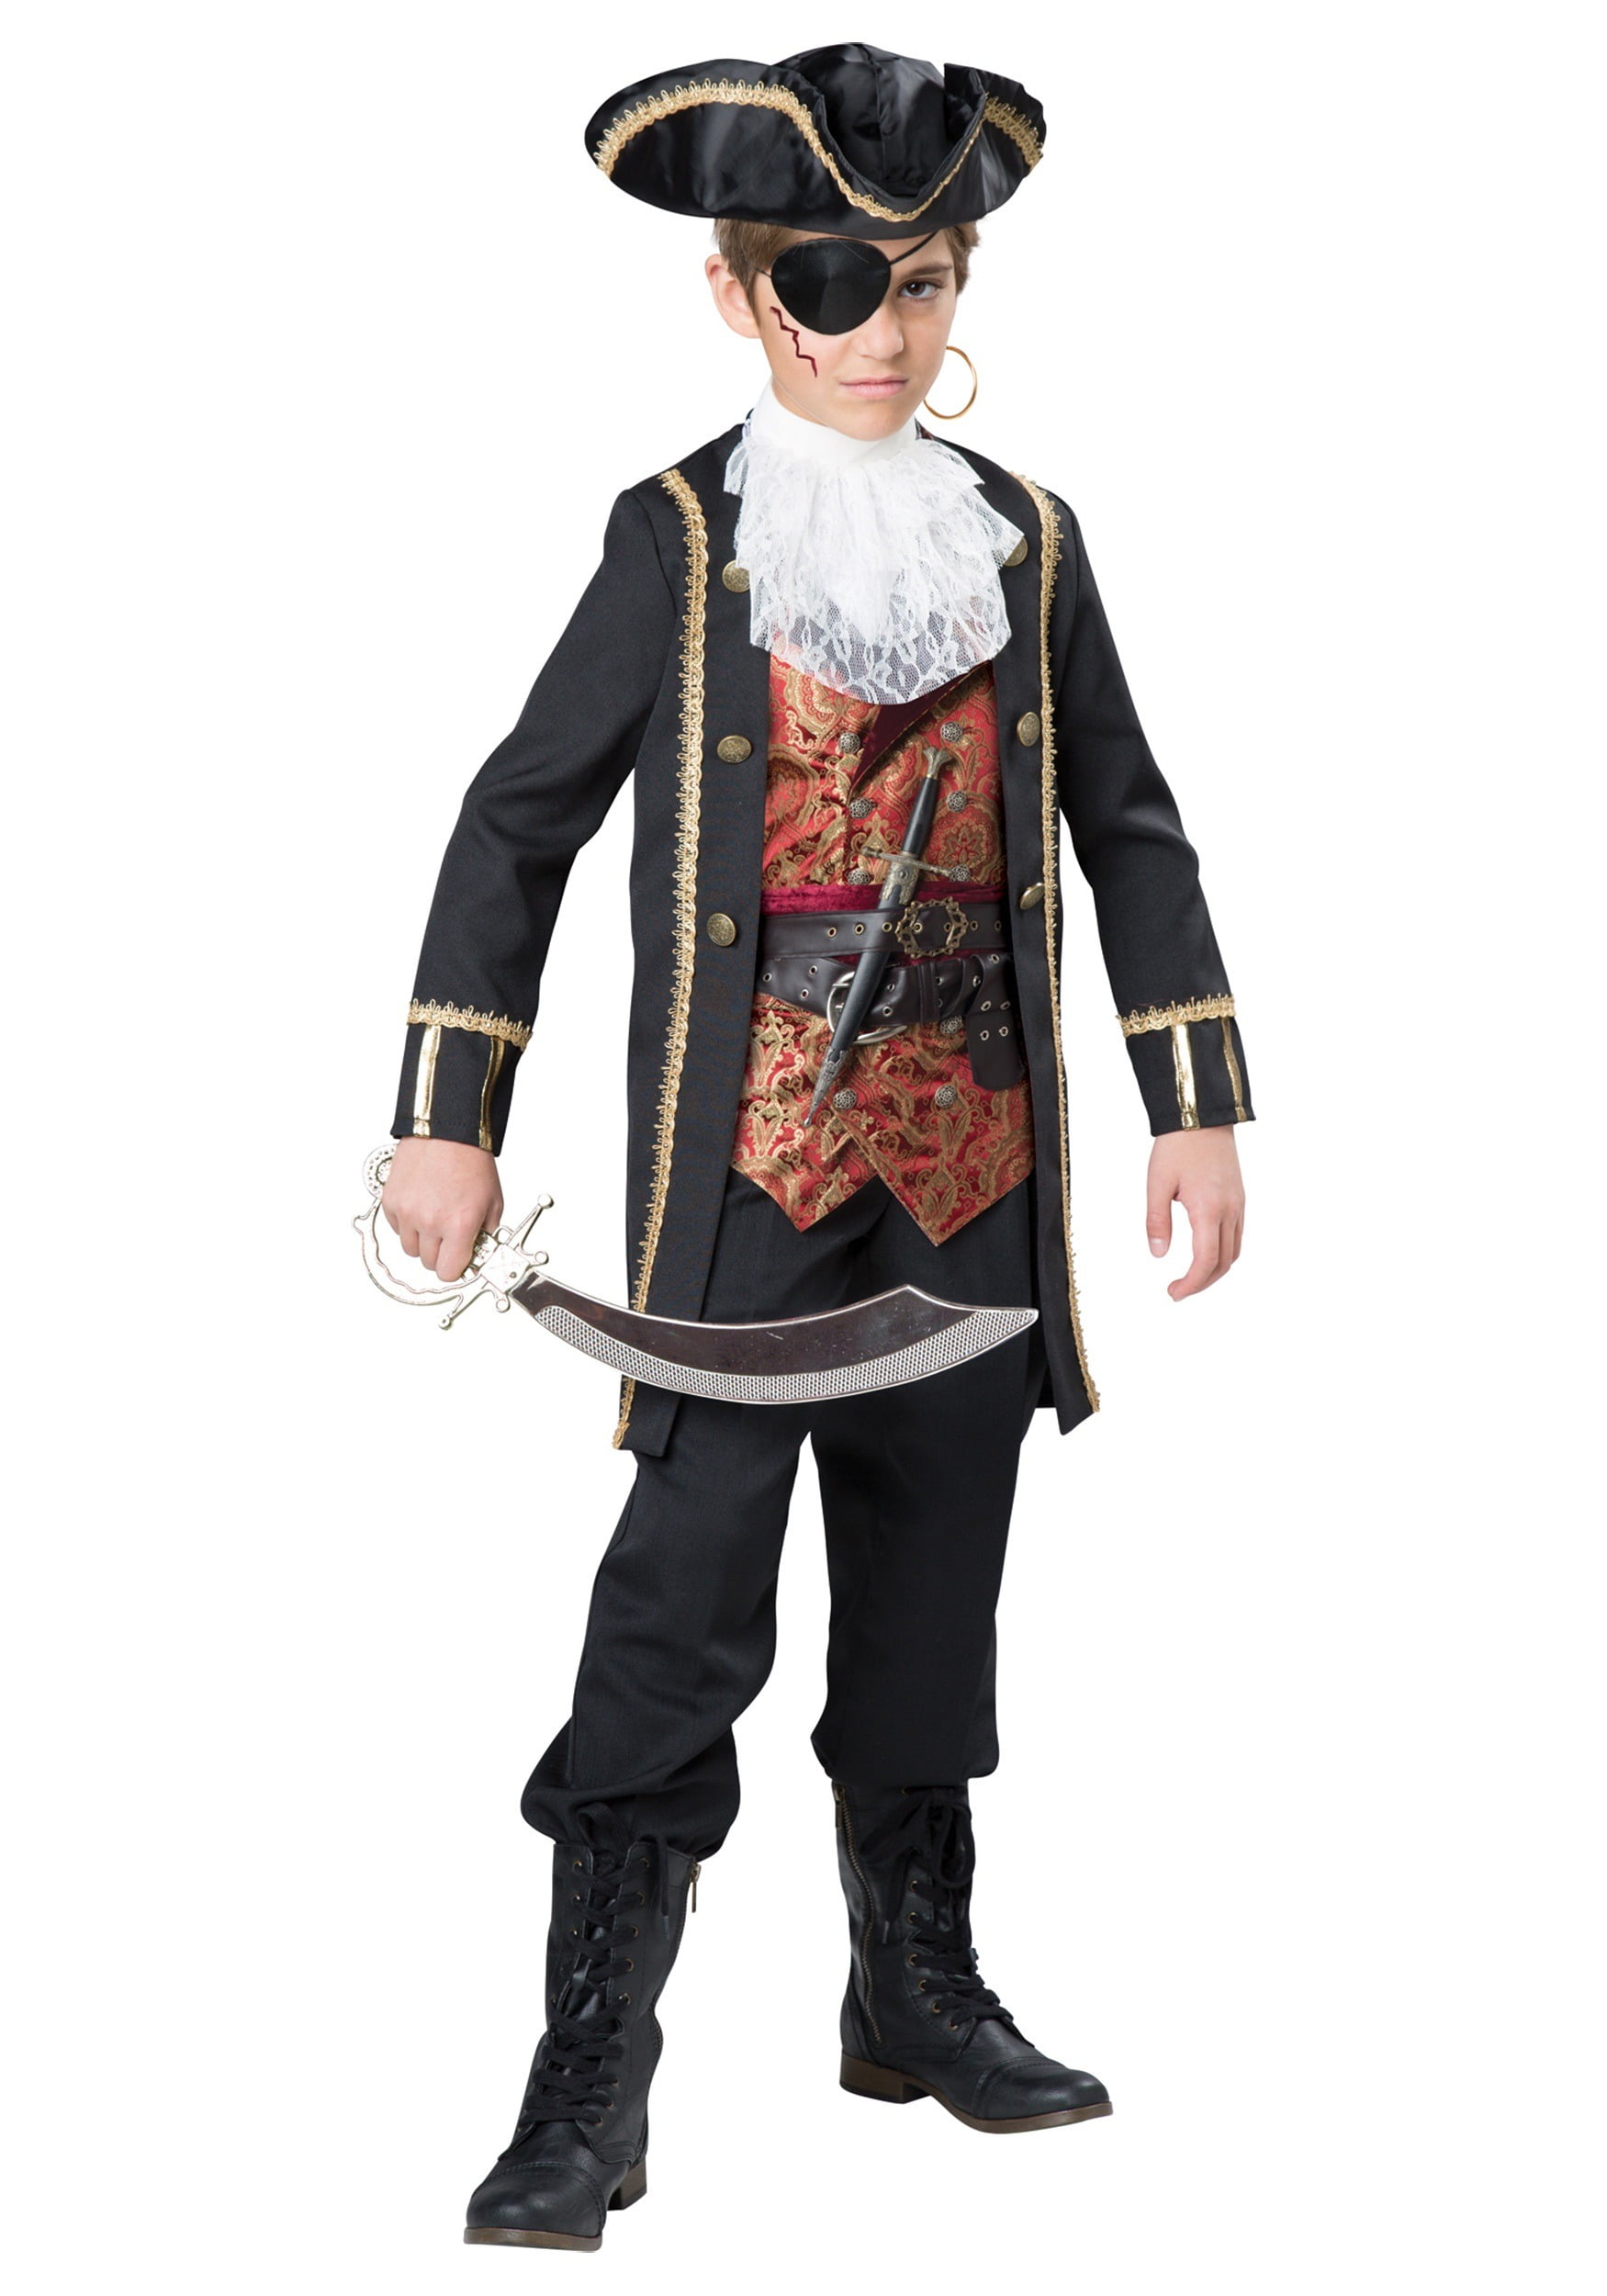 8-10 years Large Boys Pirate Captain Fancy Dress Costume